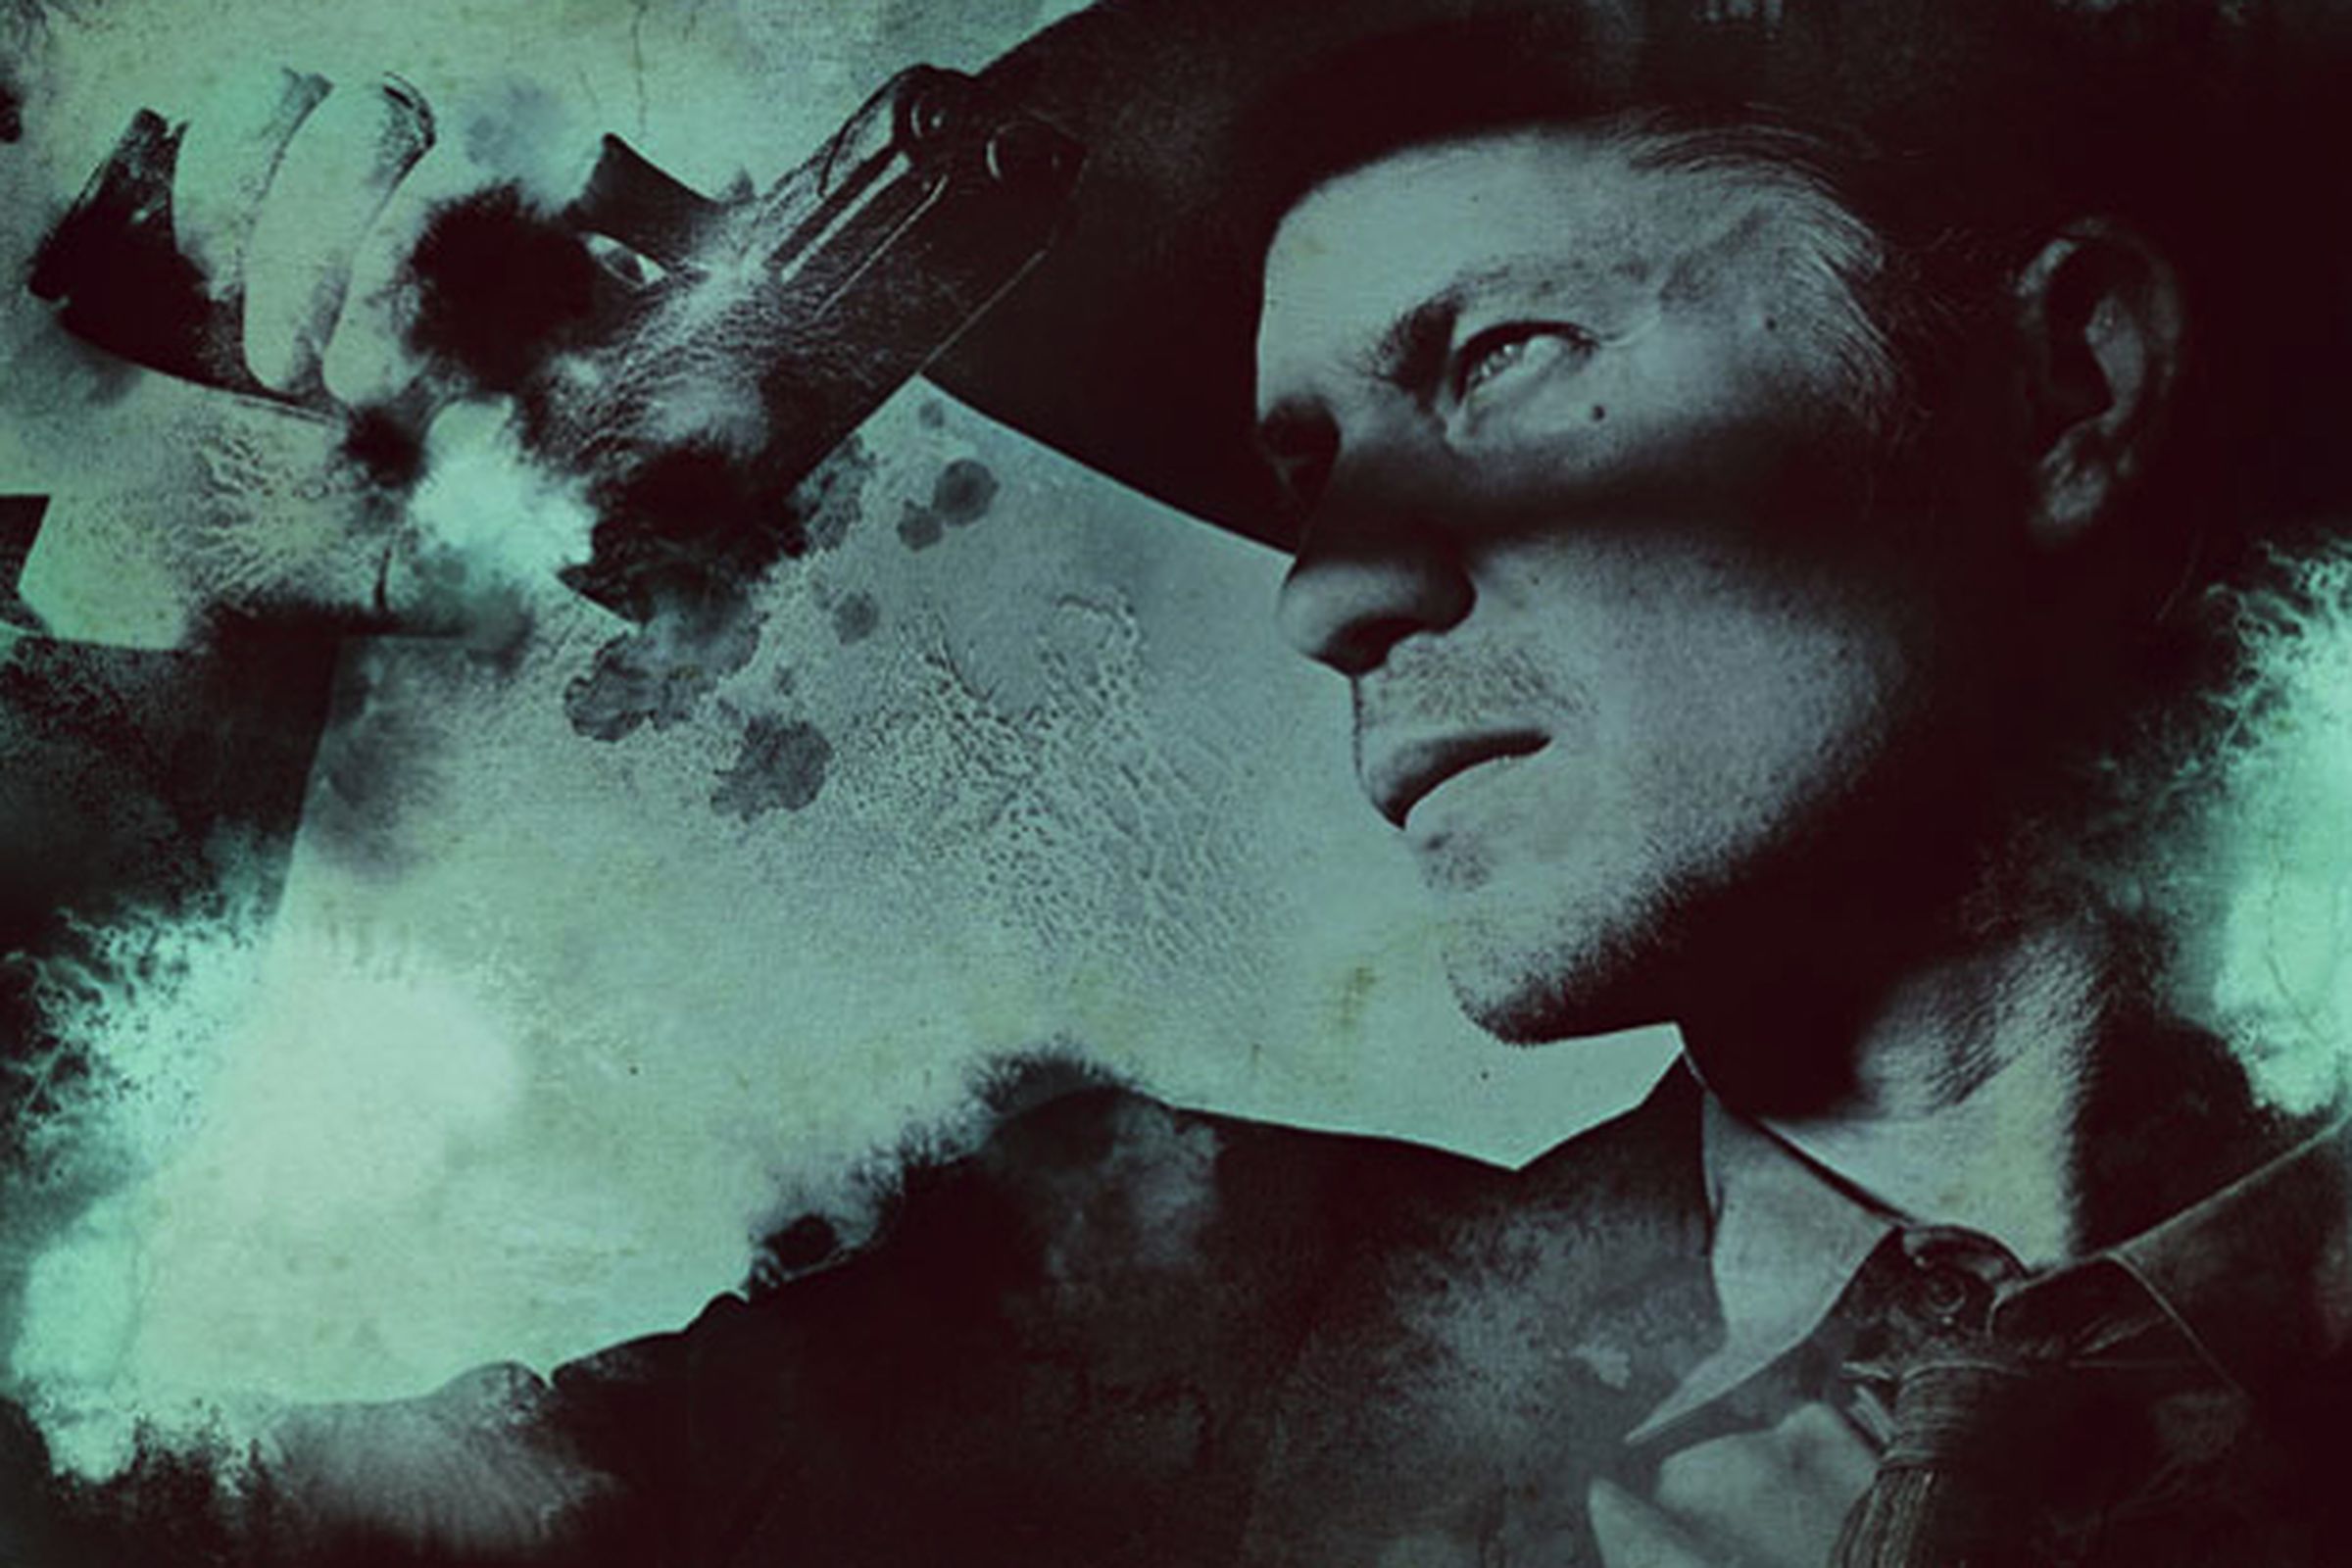 Justified promo image, via FX networks